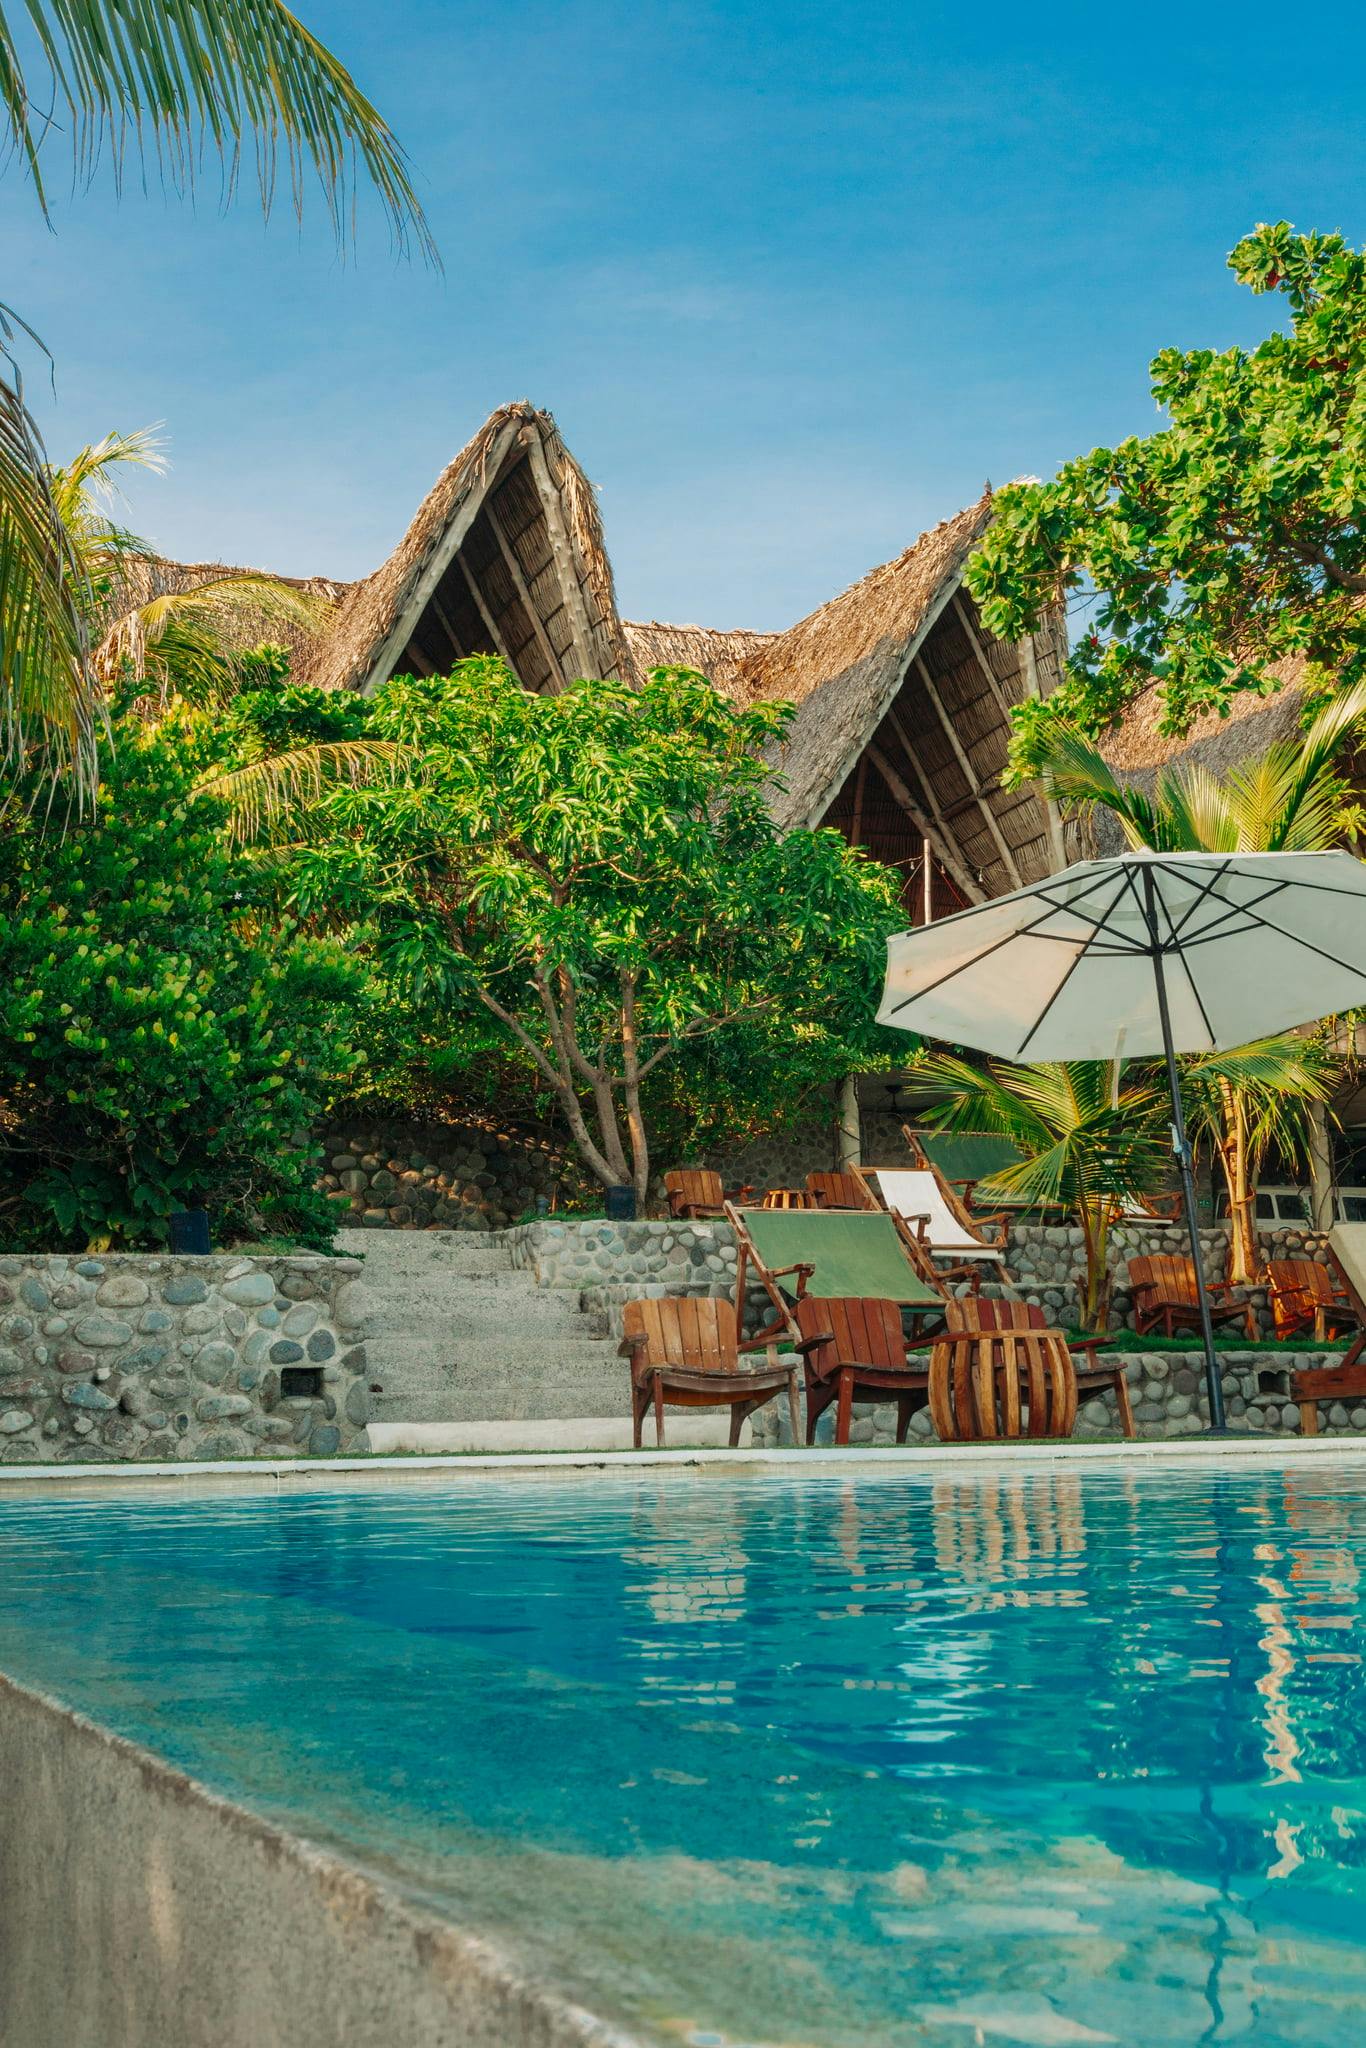 Relaxing poolside with umbrella and lounge chair, overlooking the restaurant.